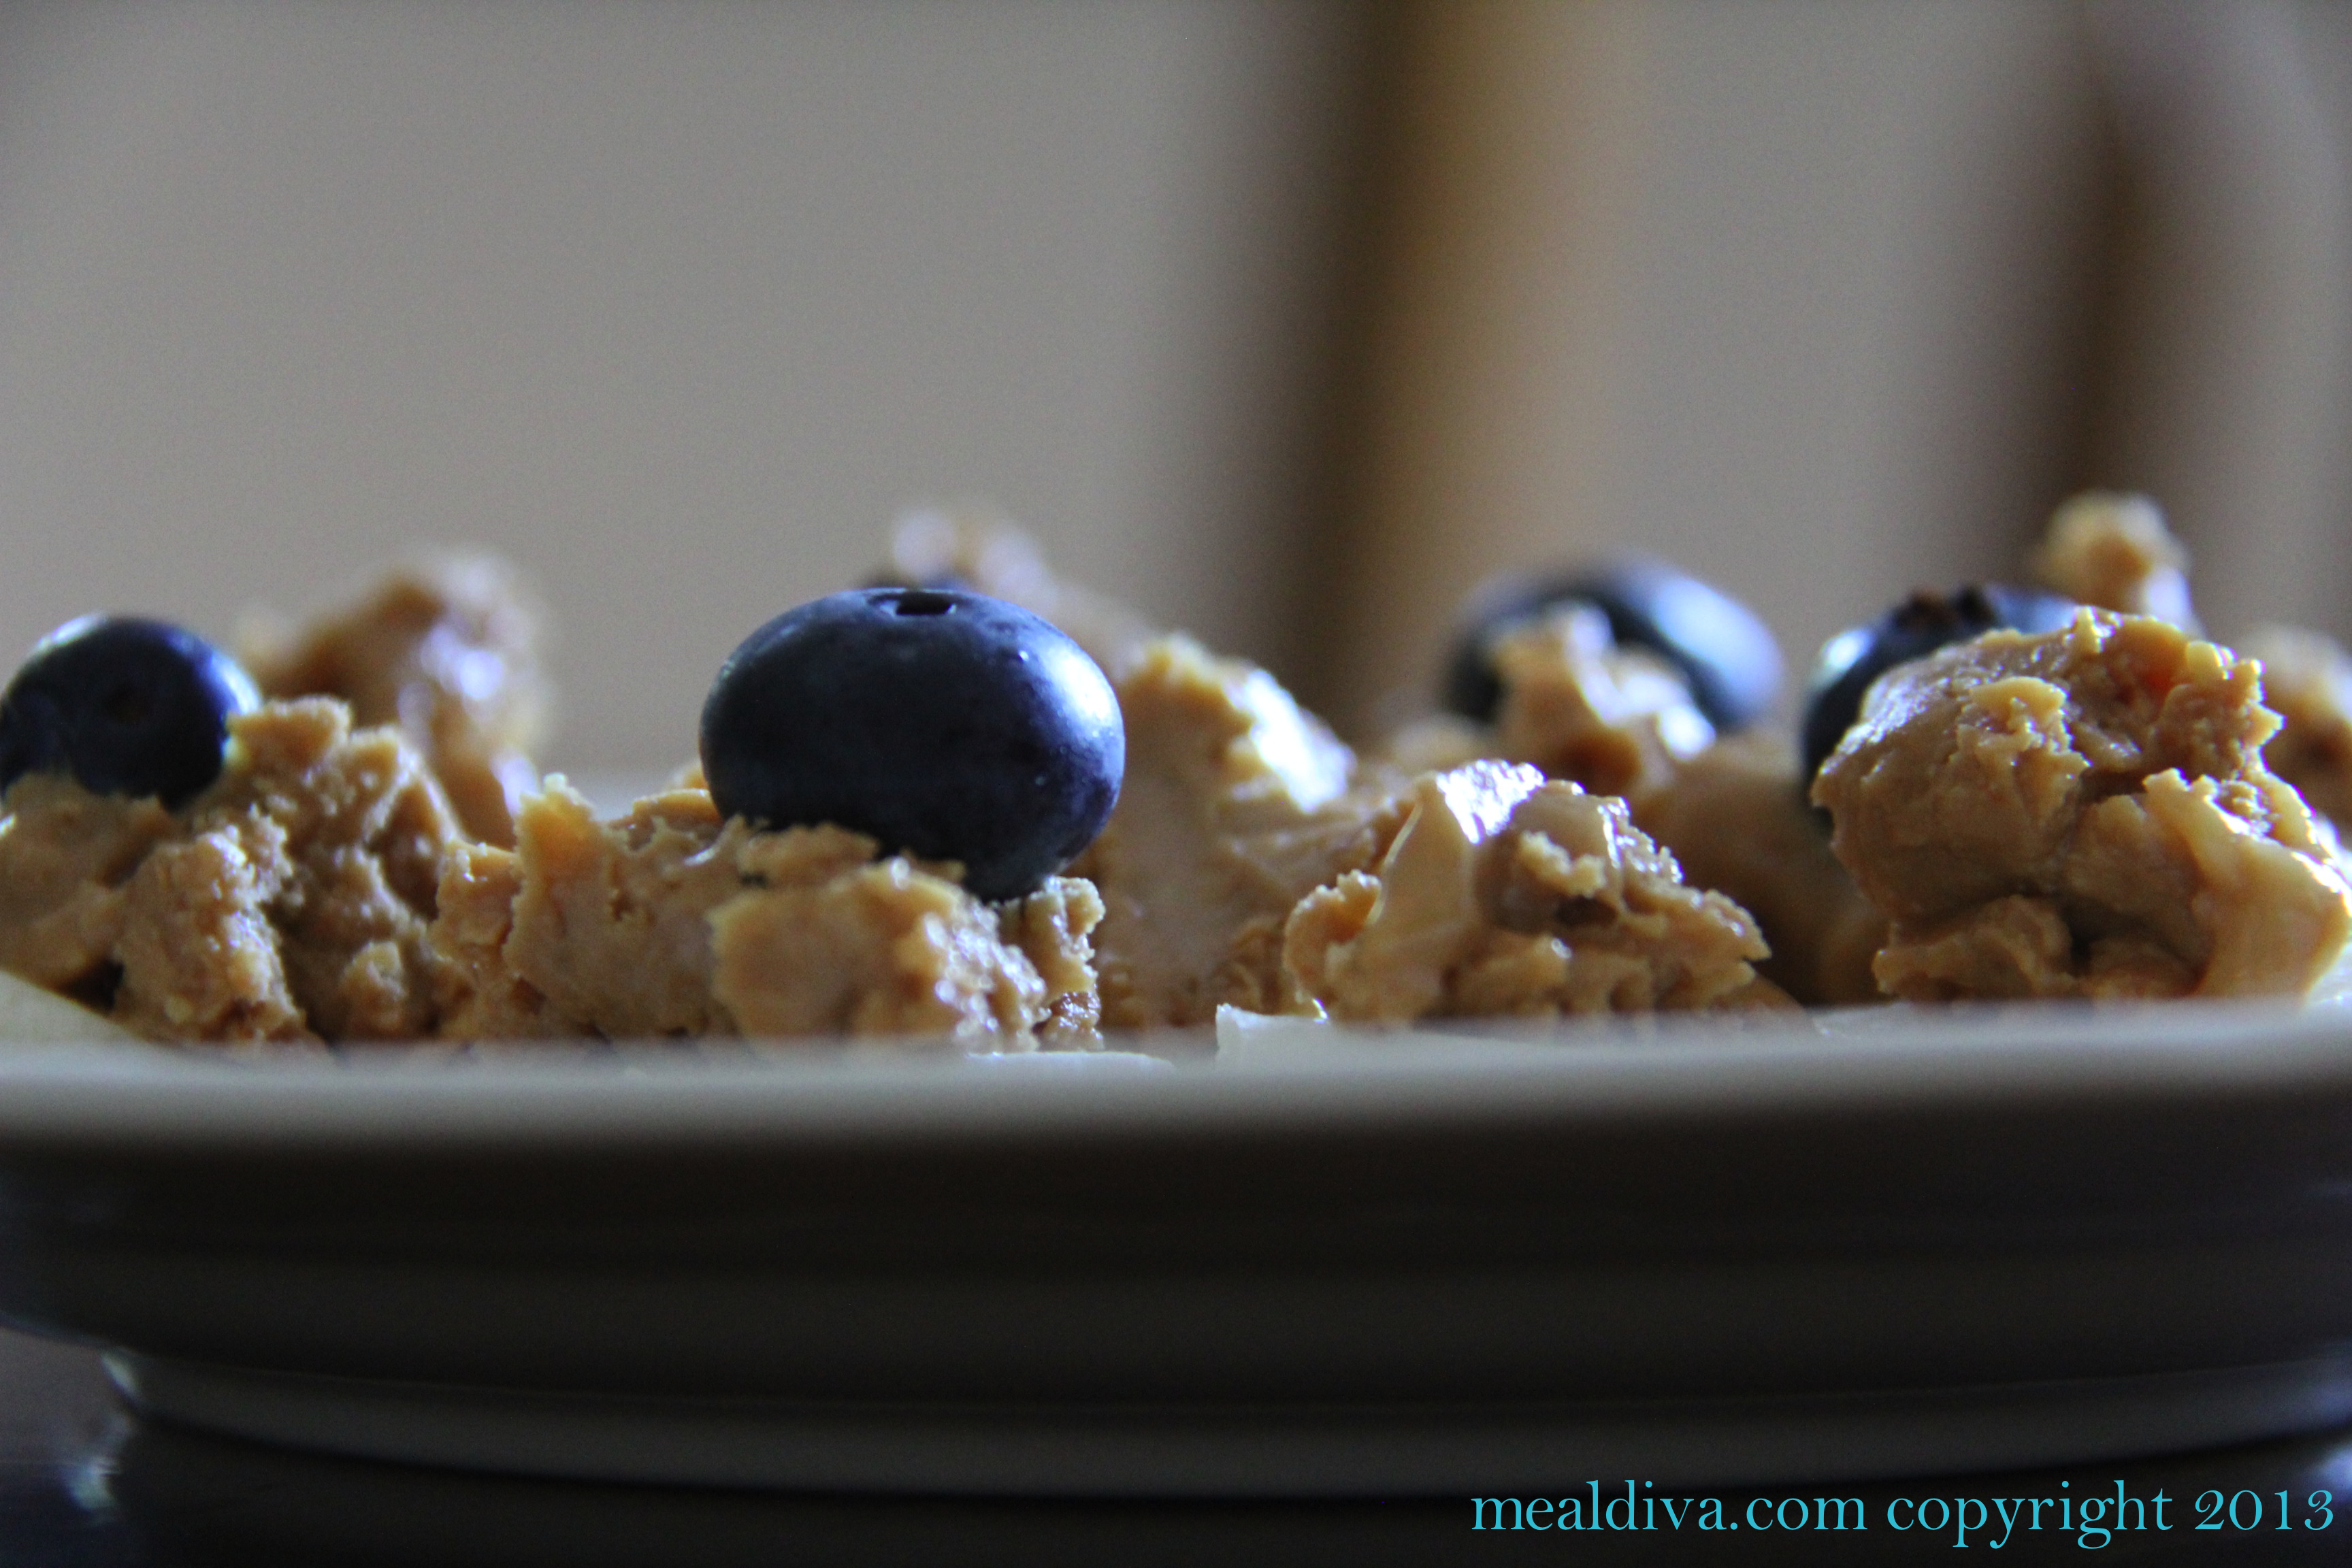 Healthy Nighttime Snacking Ideas